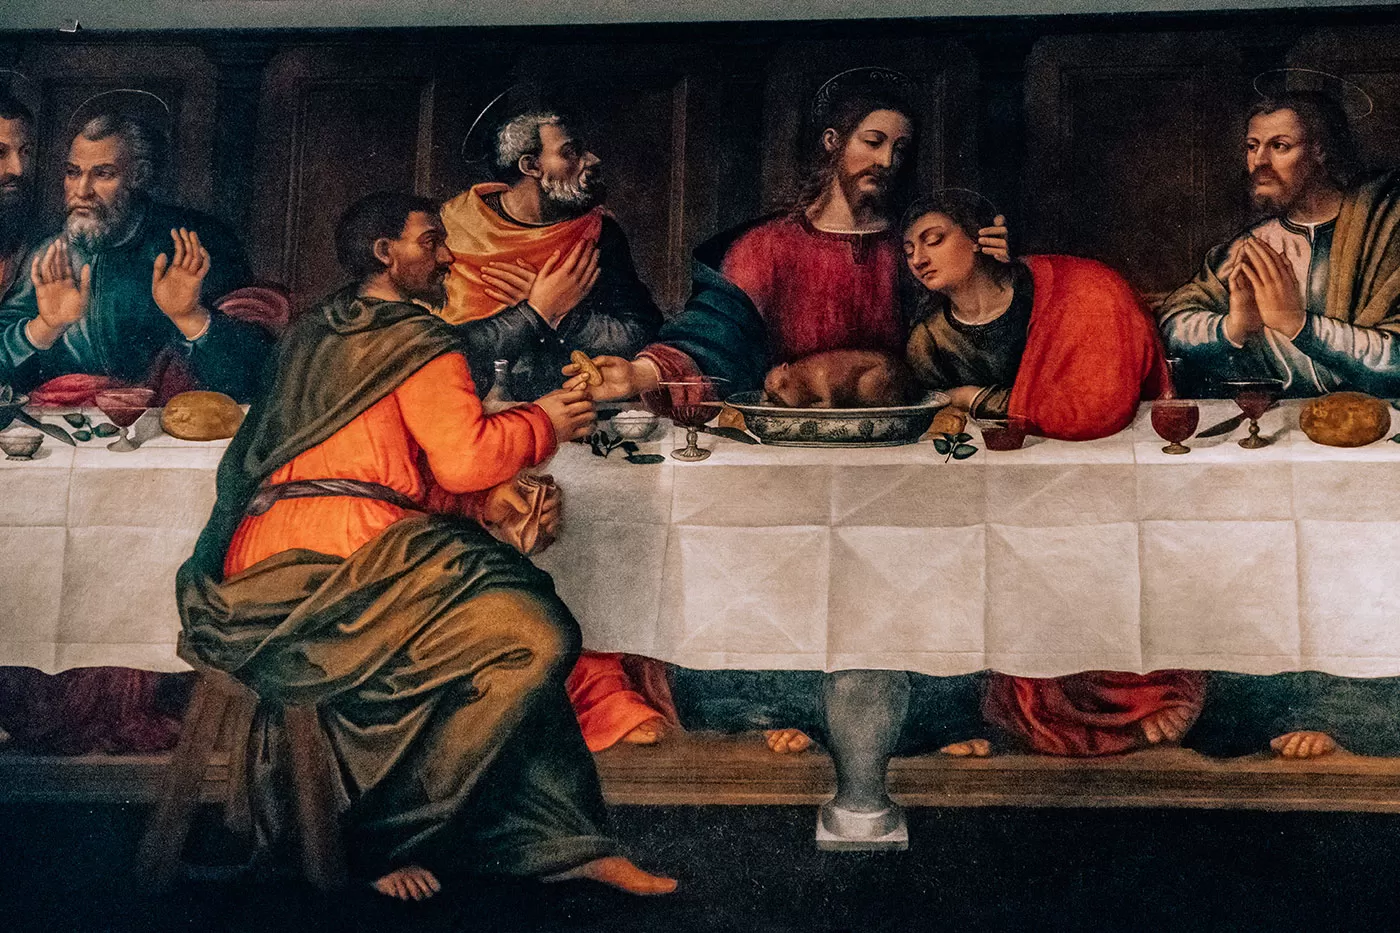 Unique Things to Do in Florence - Last Supper at Basilica of Santa Maria Novella